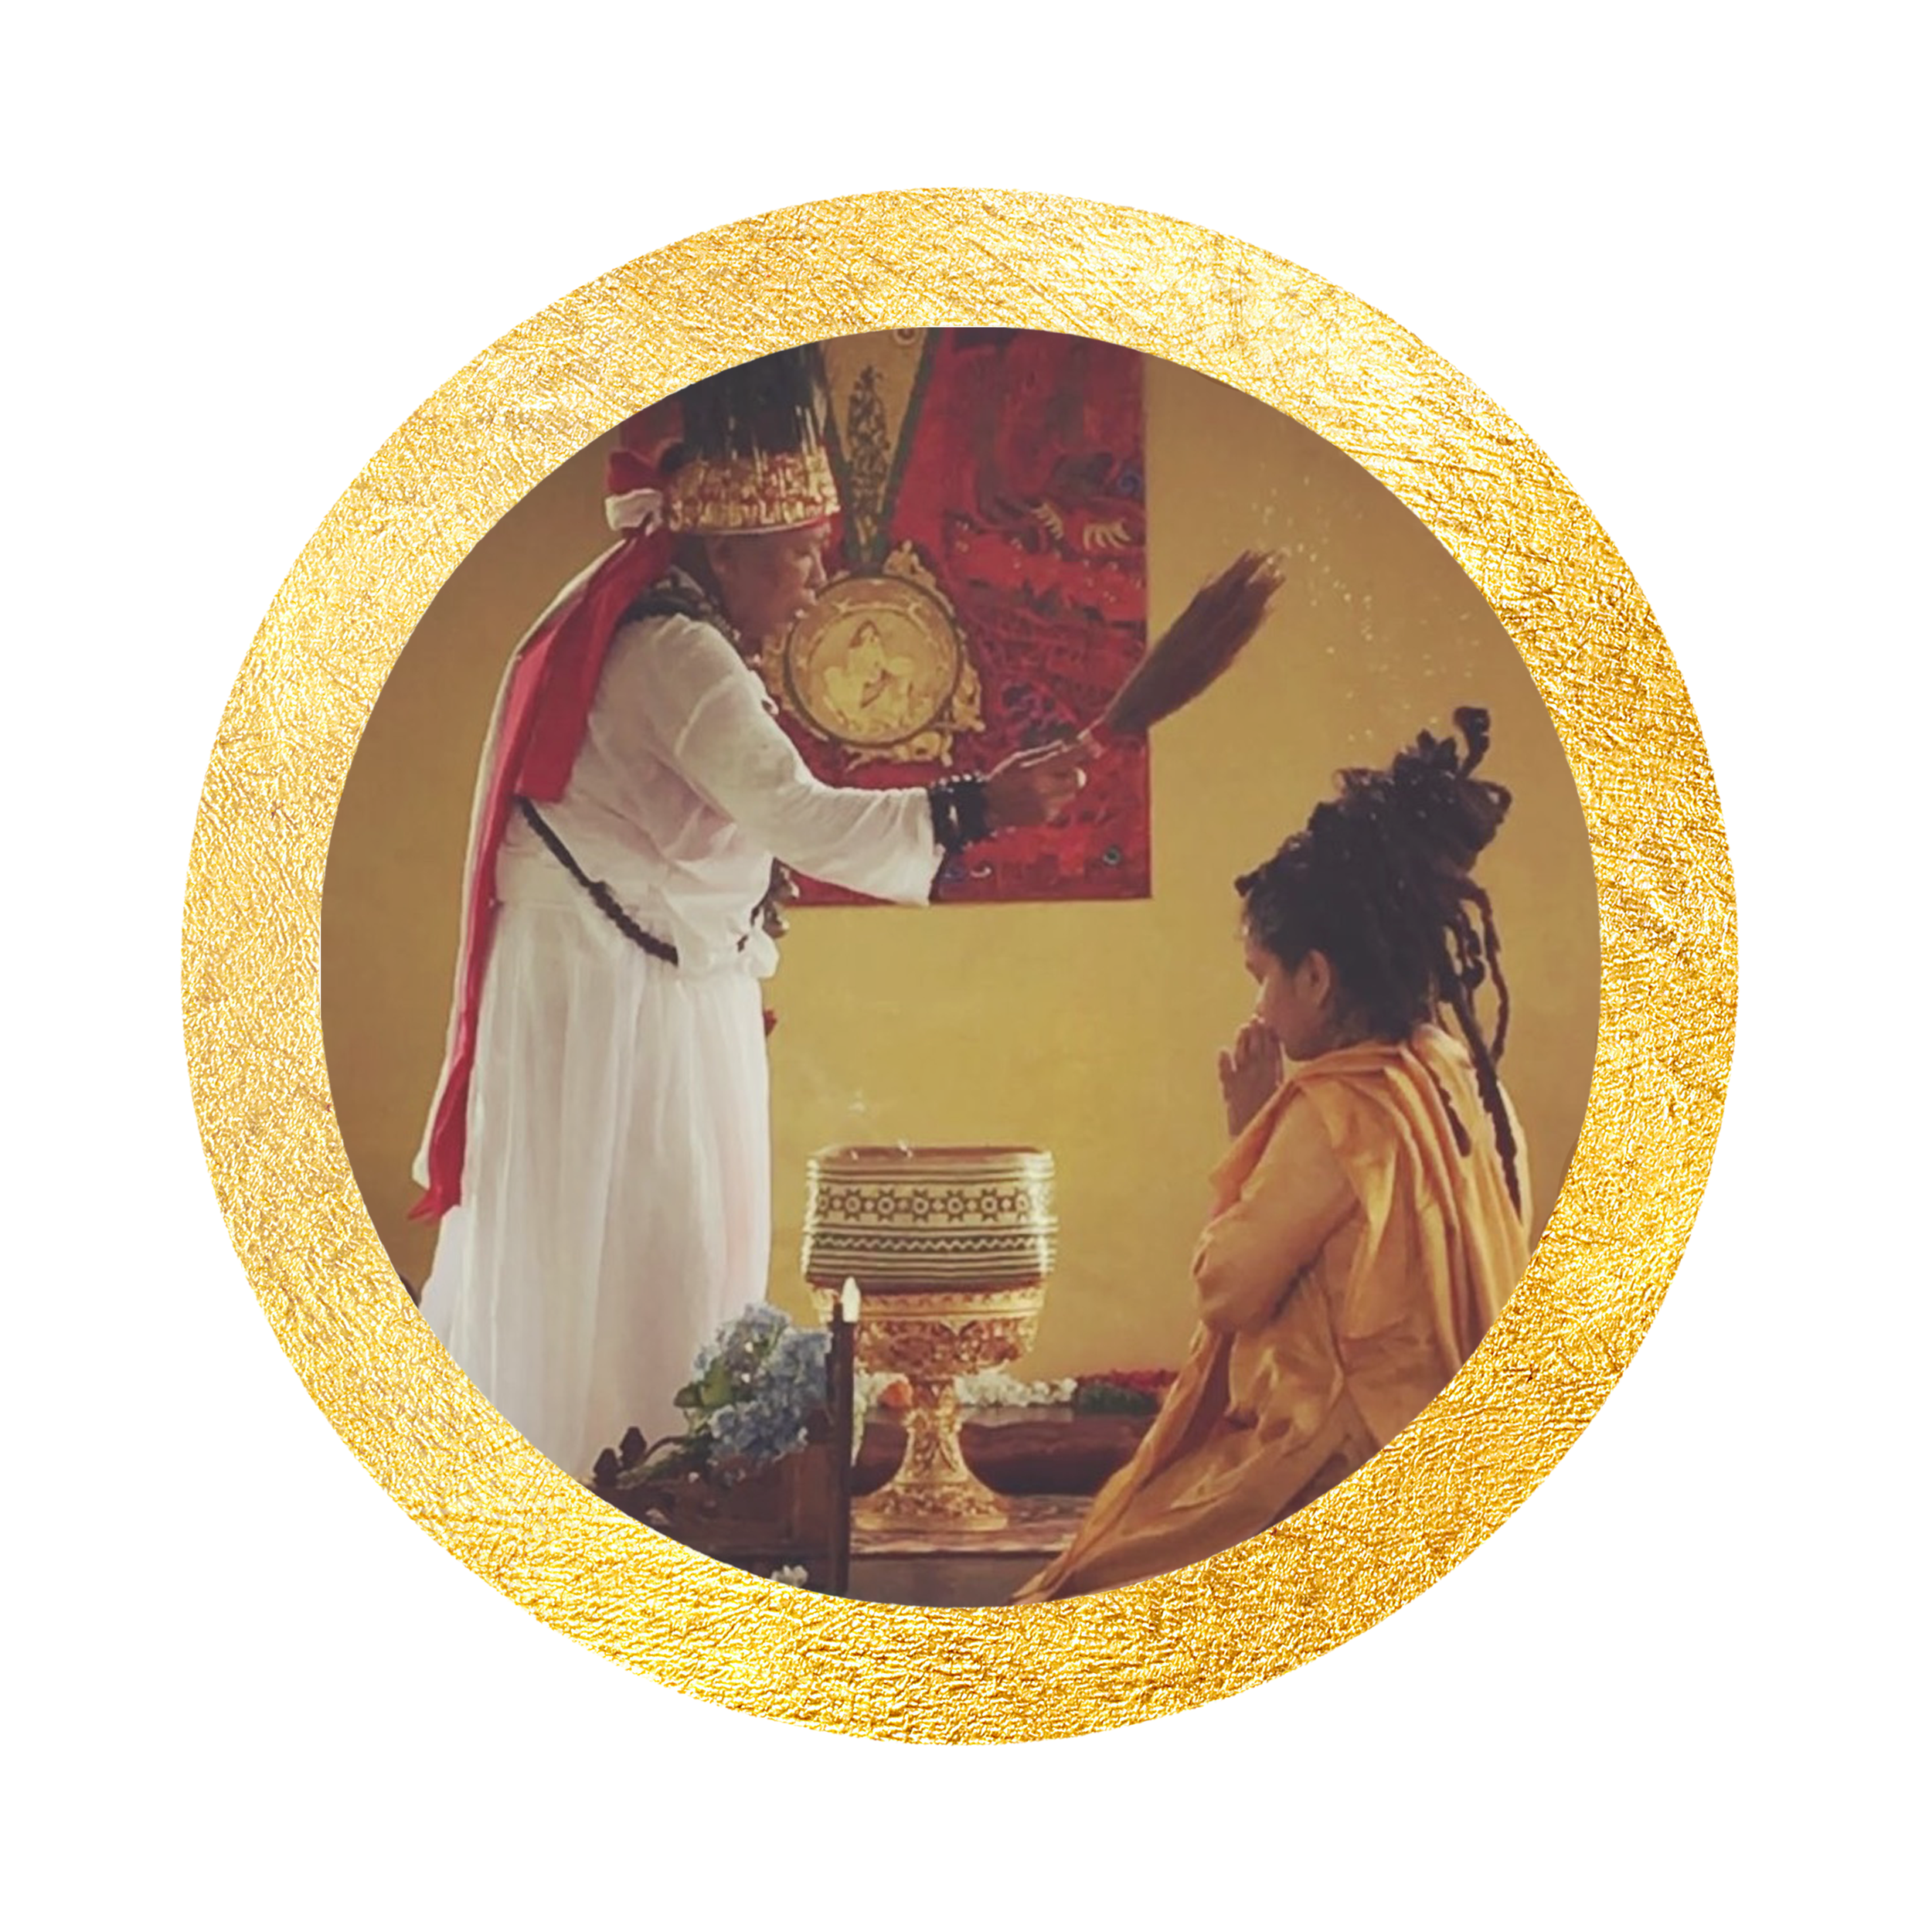 Wu Wei Circle wPhoto Grandmother Aama Bombo + Parvathy Baul.png